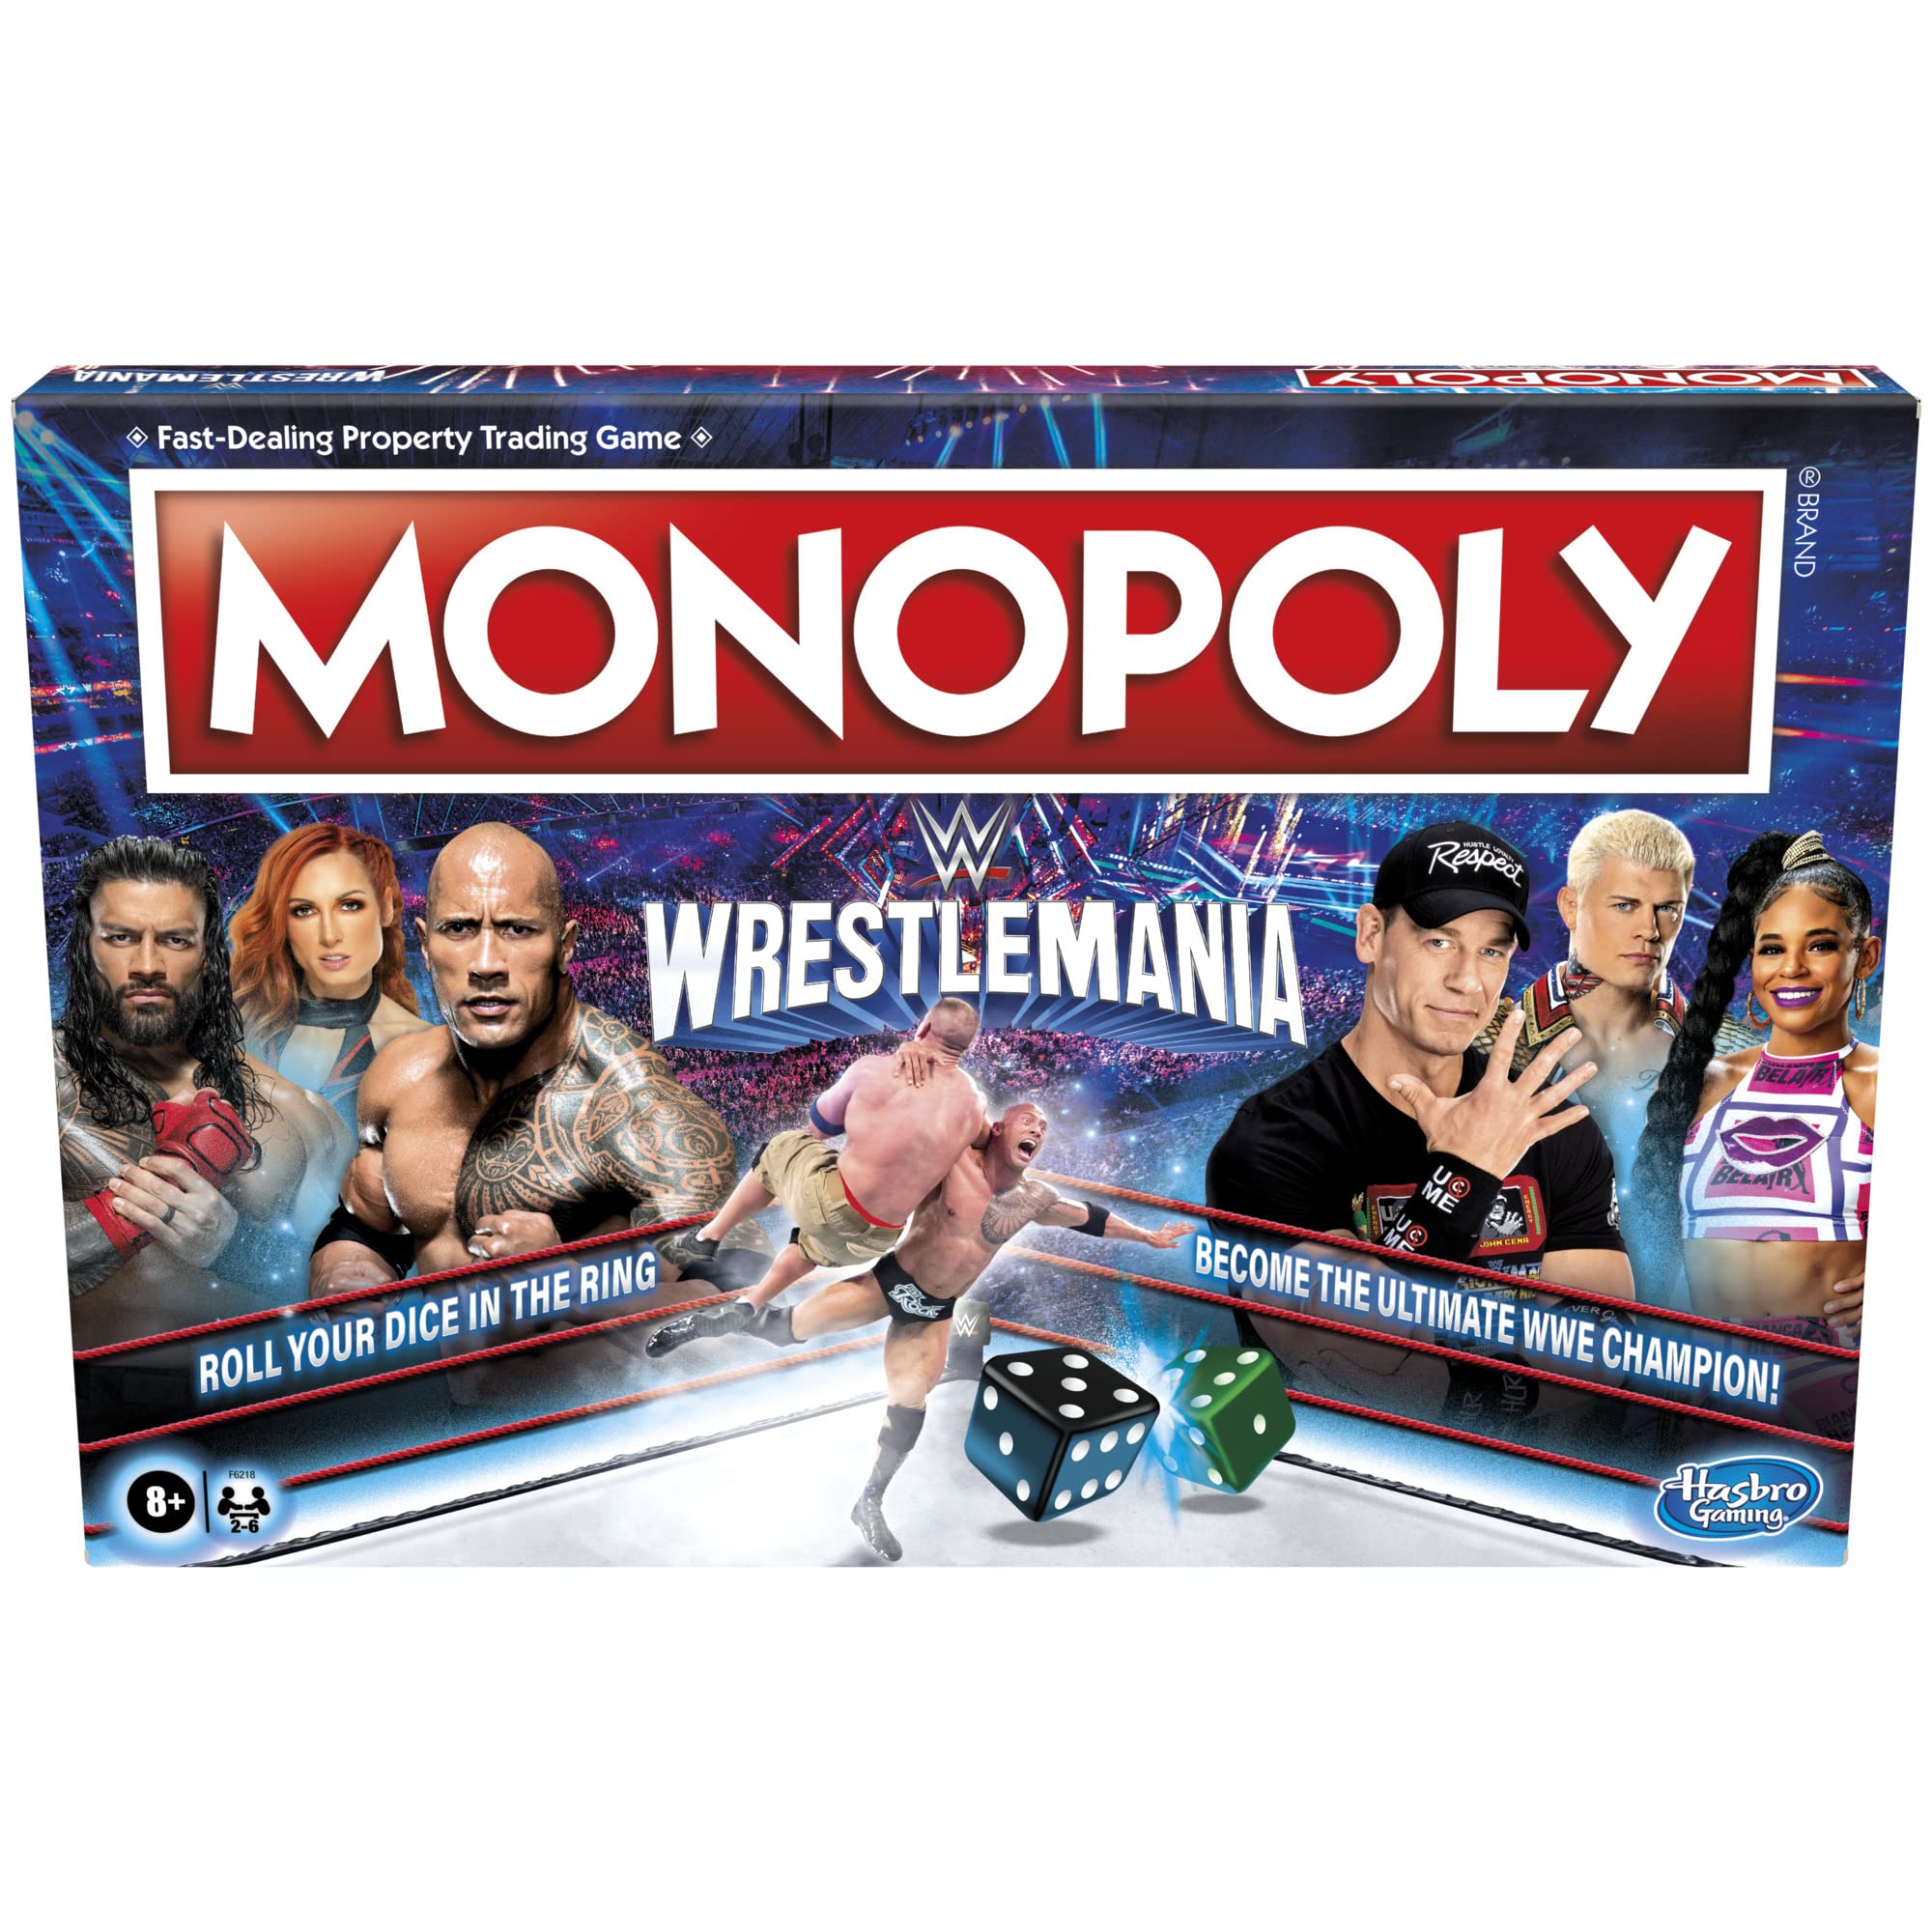 Monopoly Board Game Wrestlemania Edition $9.83 + Free Shipping w/ Prime or on orders over $35